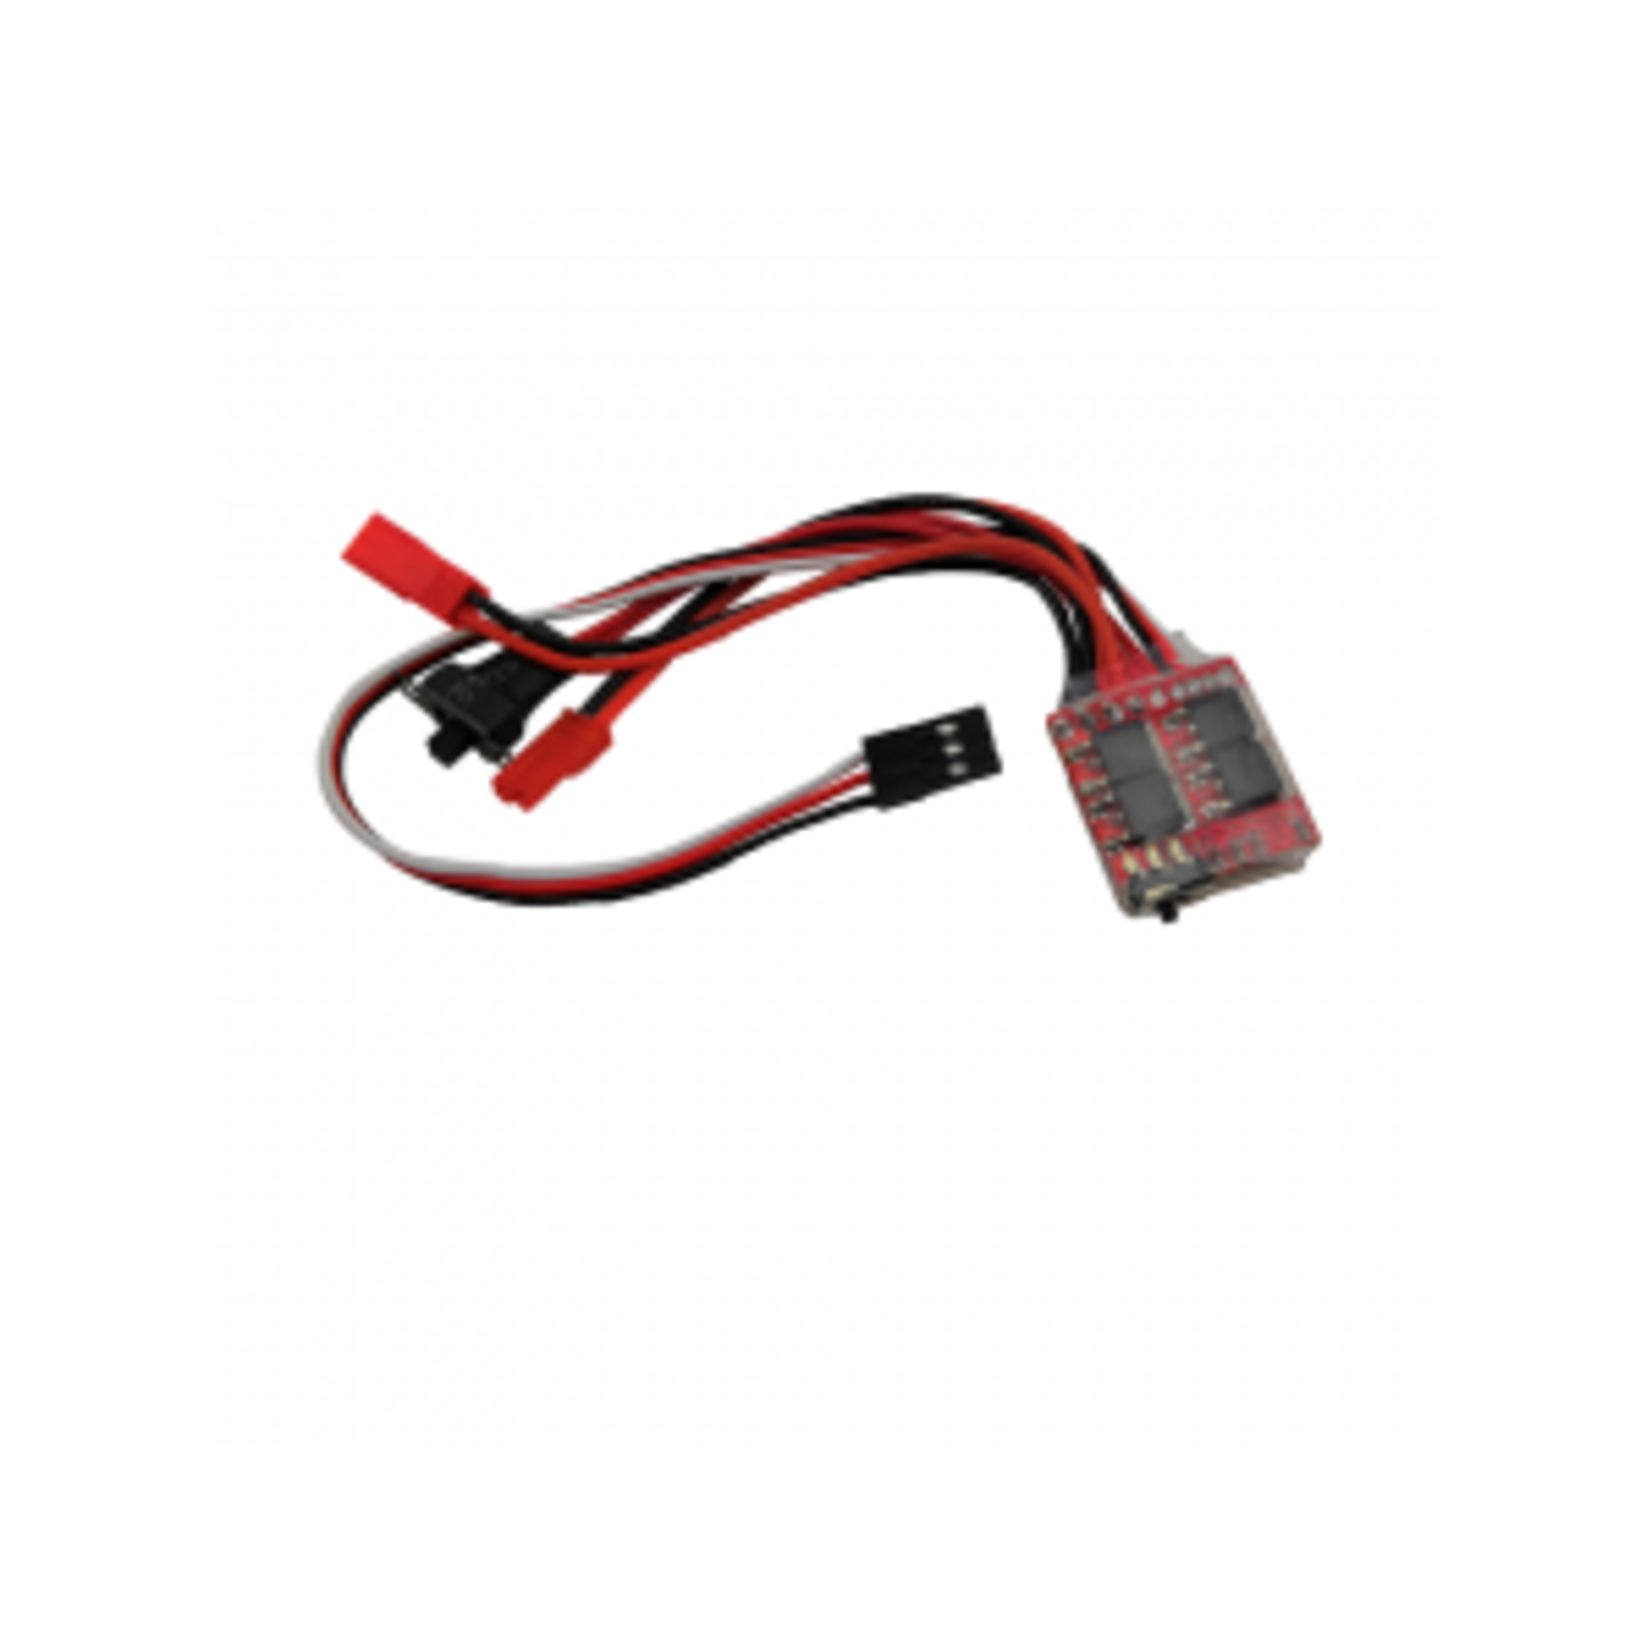 Hobby Details 30A Micro Brushed ESC for Winch Control and other RC Veihicles Board: Forward and Backward Brake